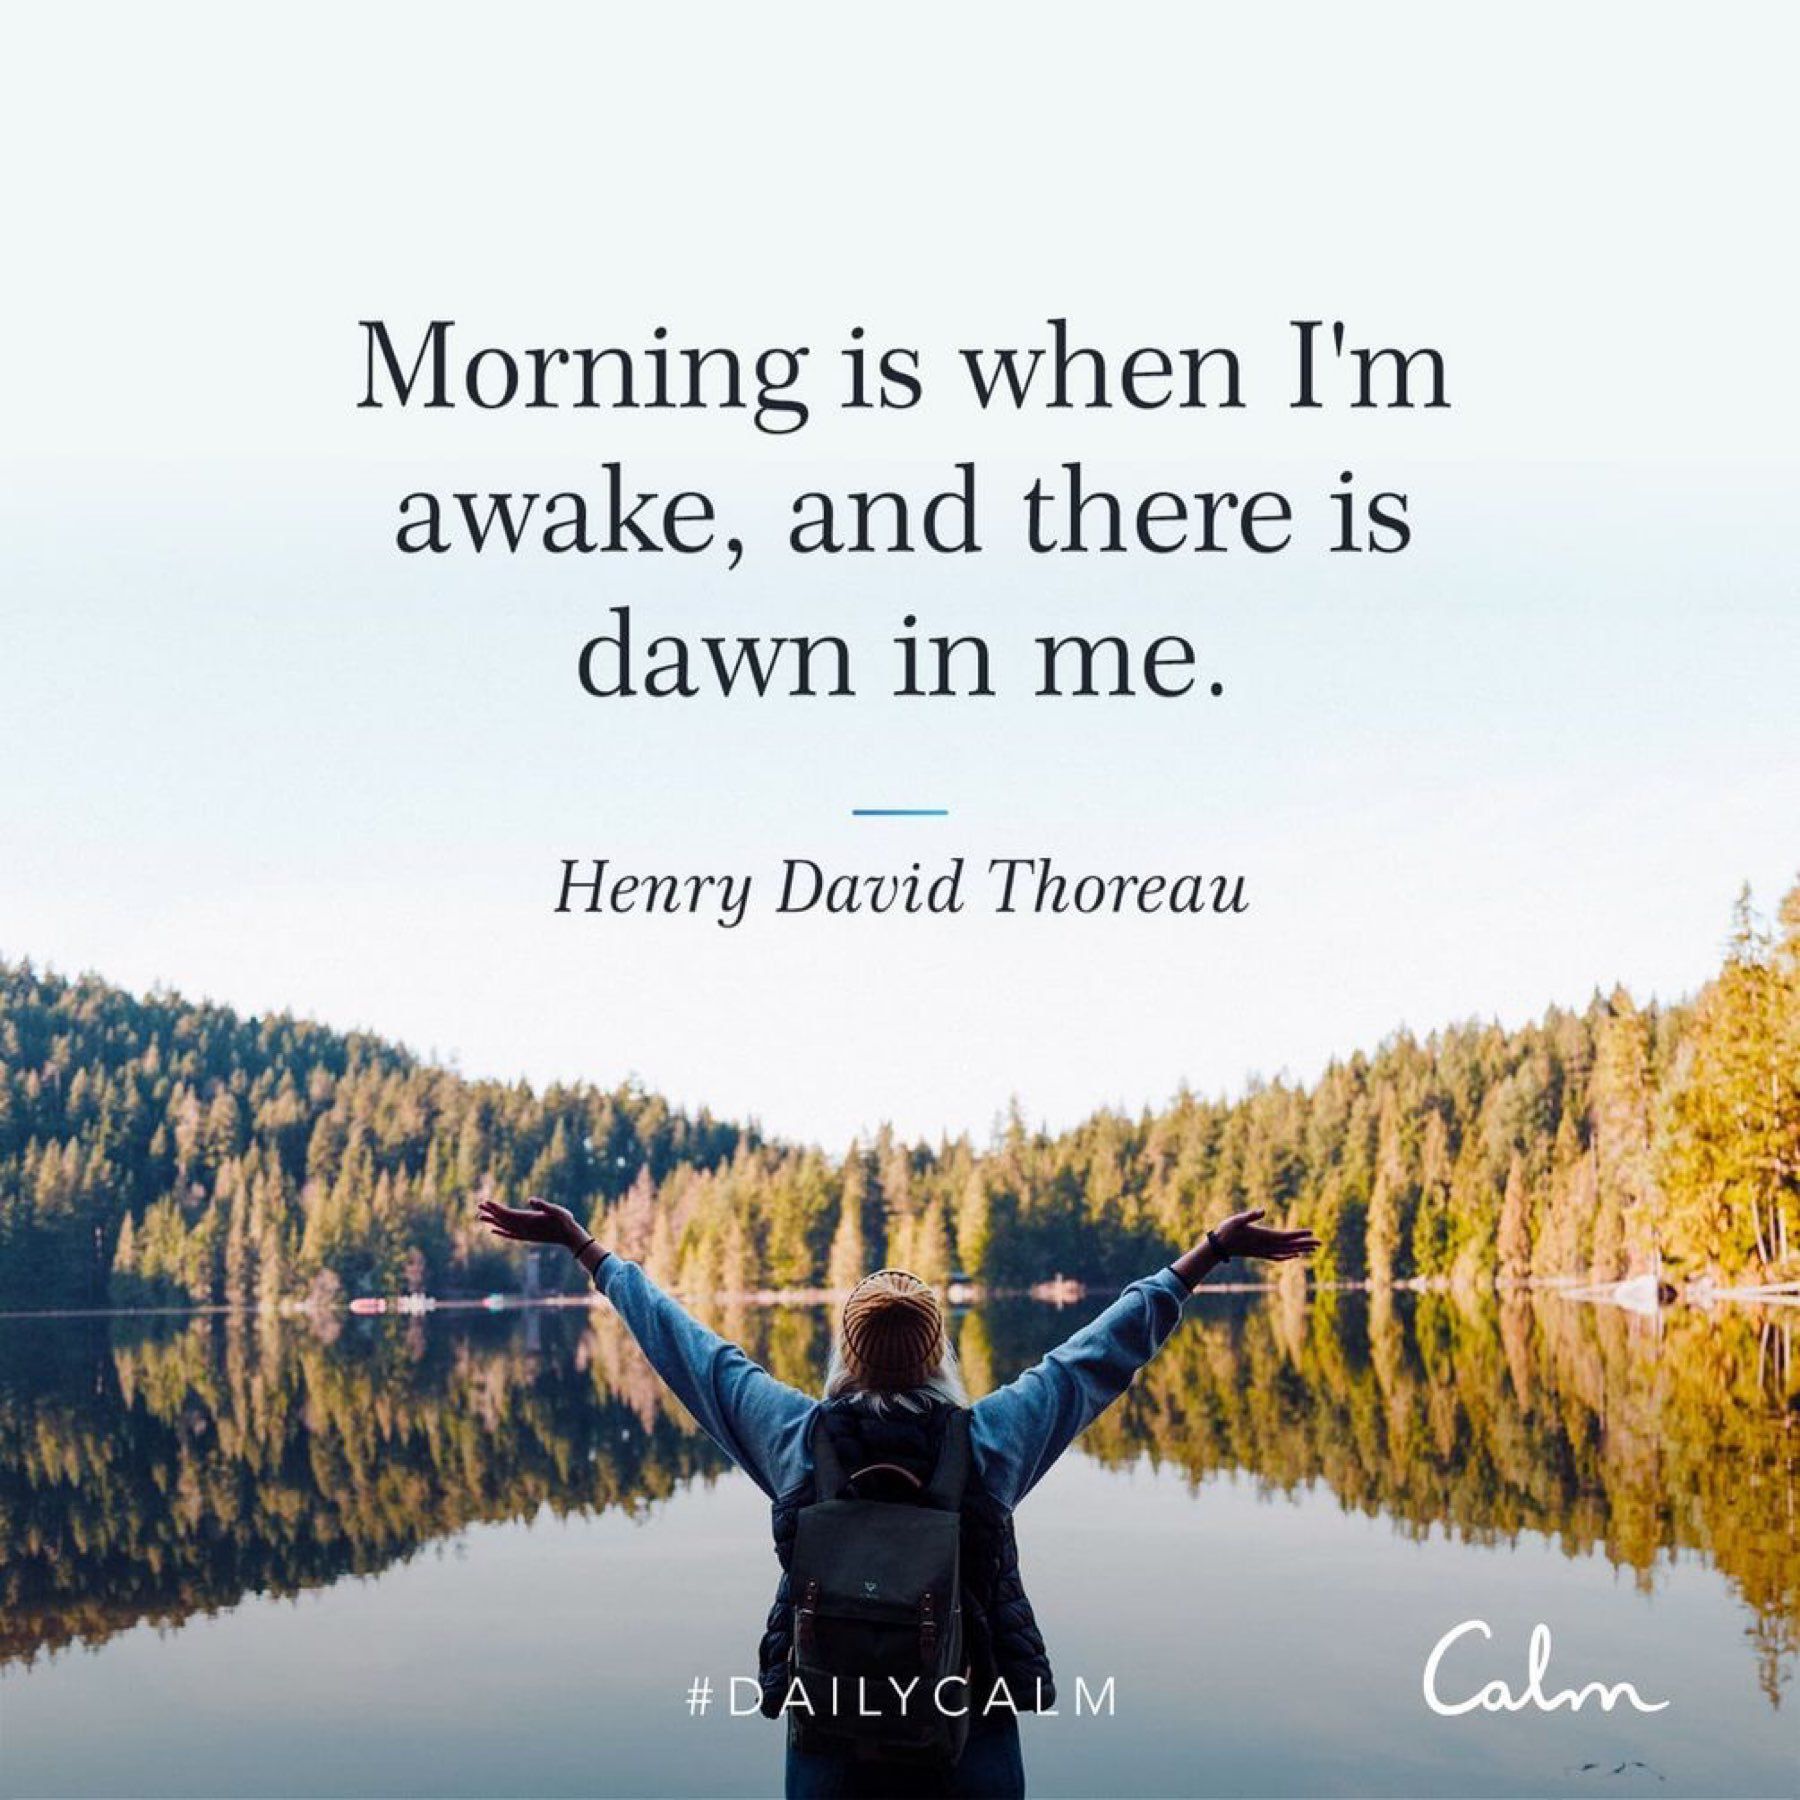 Morning is when I'm awake and there is dawn in me